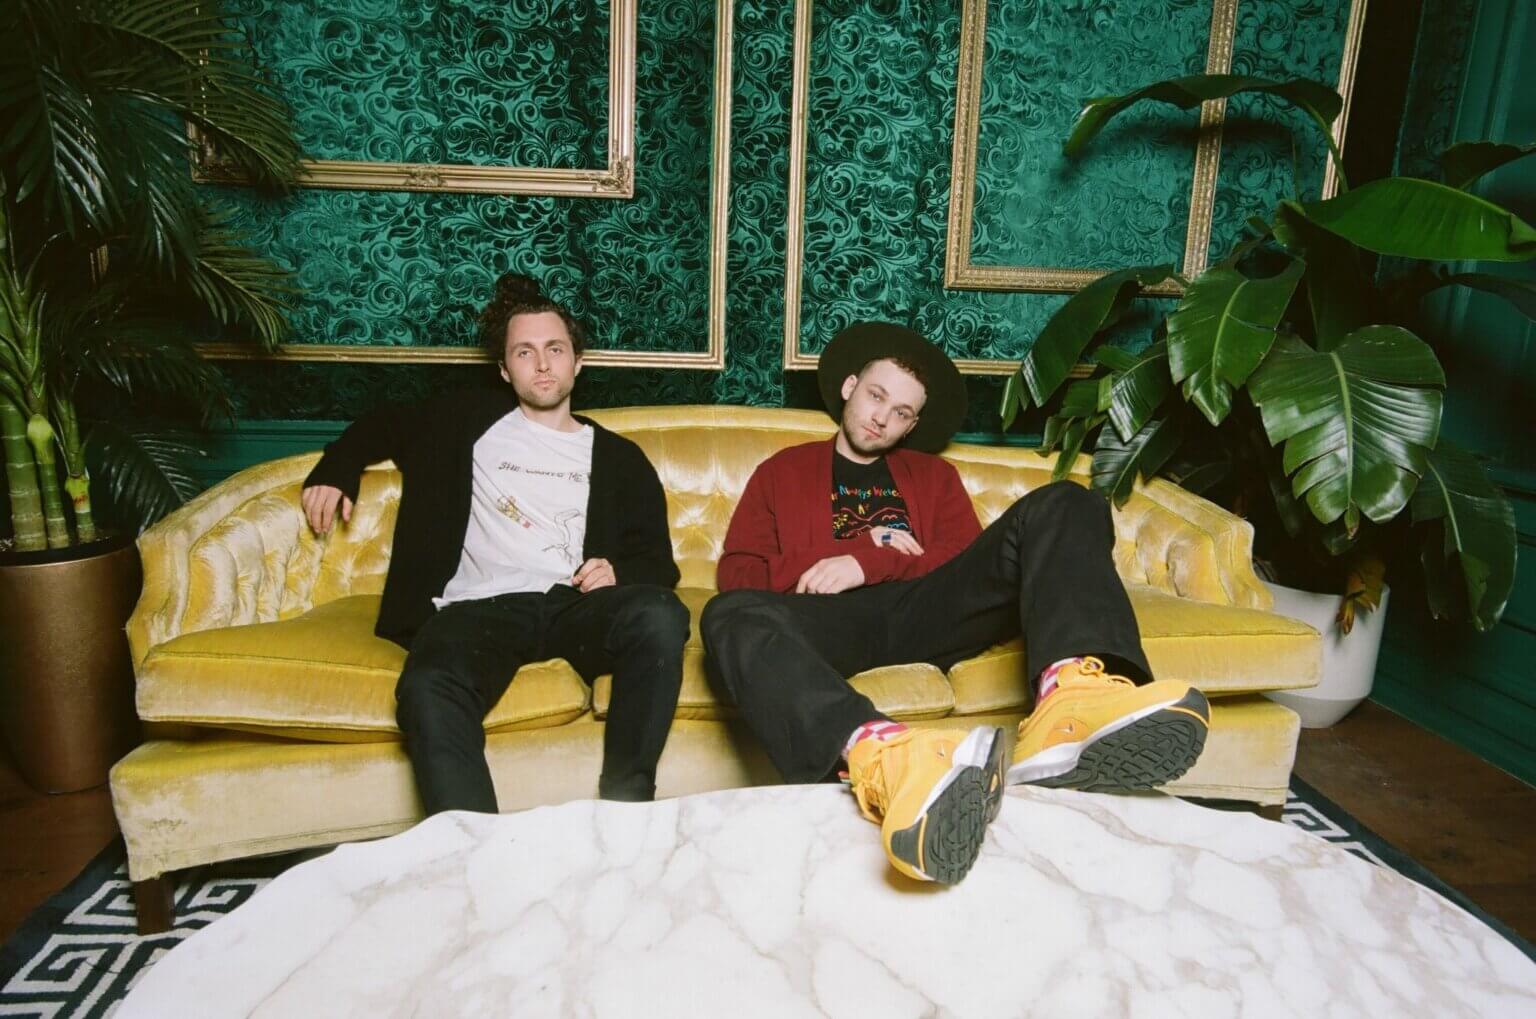 "Summertime 1, 2" by Brasstracks featuring Yung Pinch and Rothstein is Northern Transmissions Song of the Day